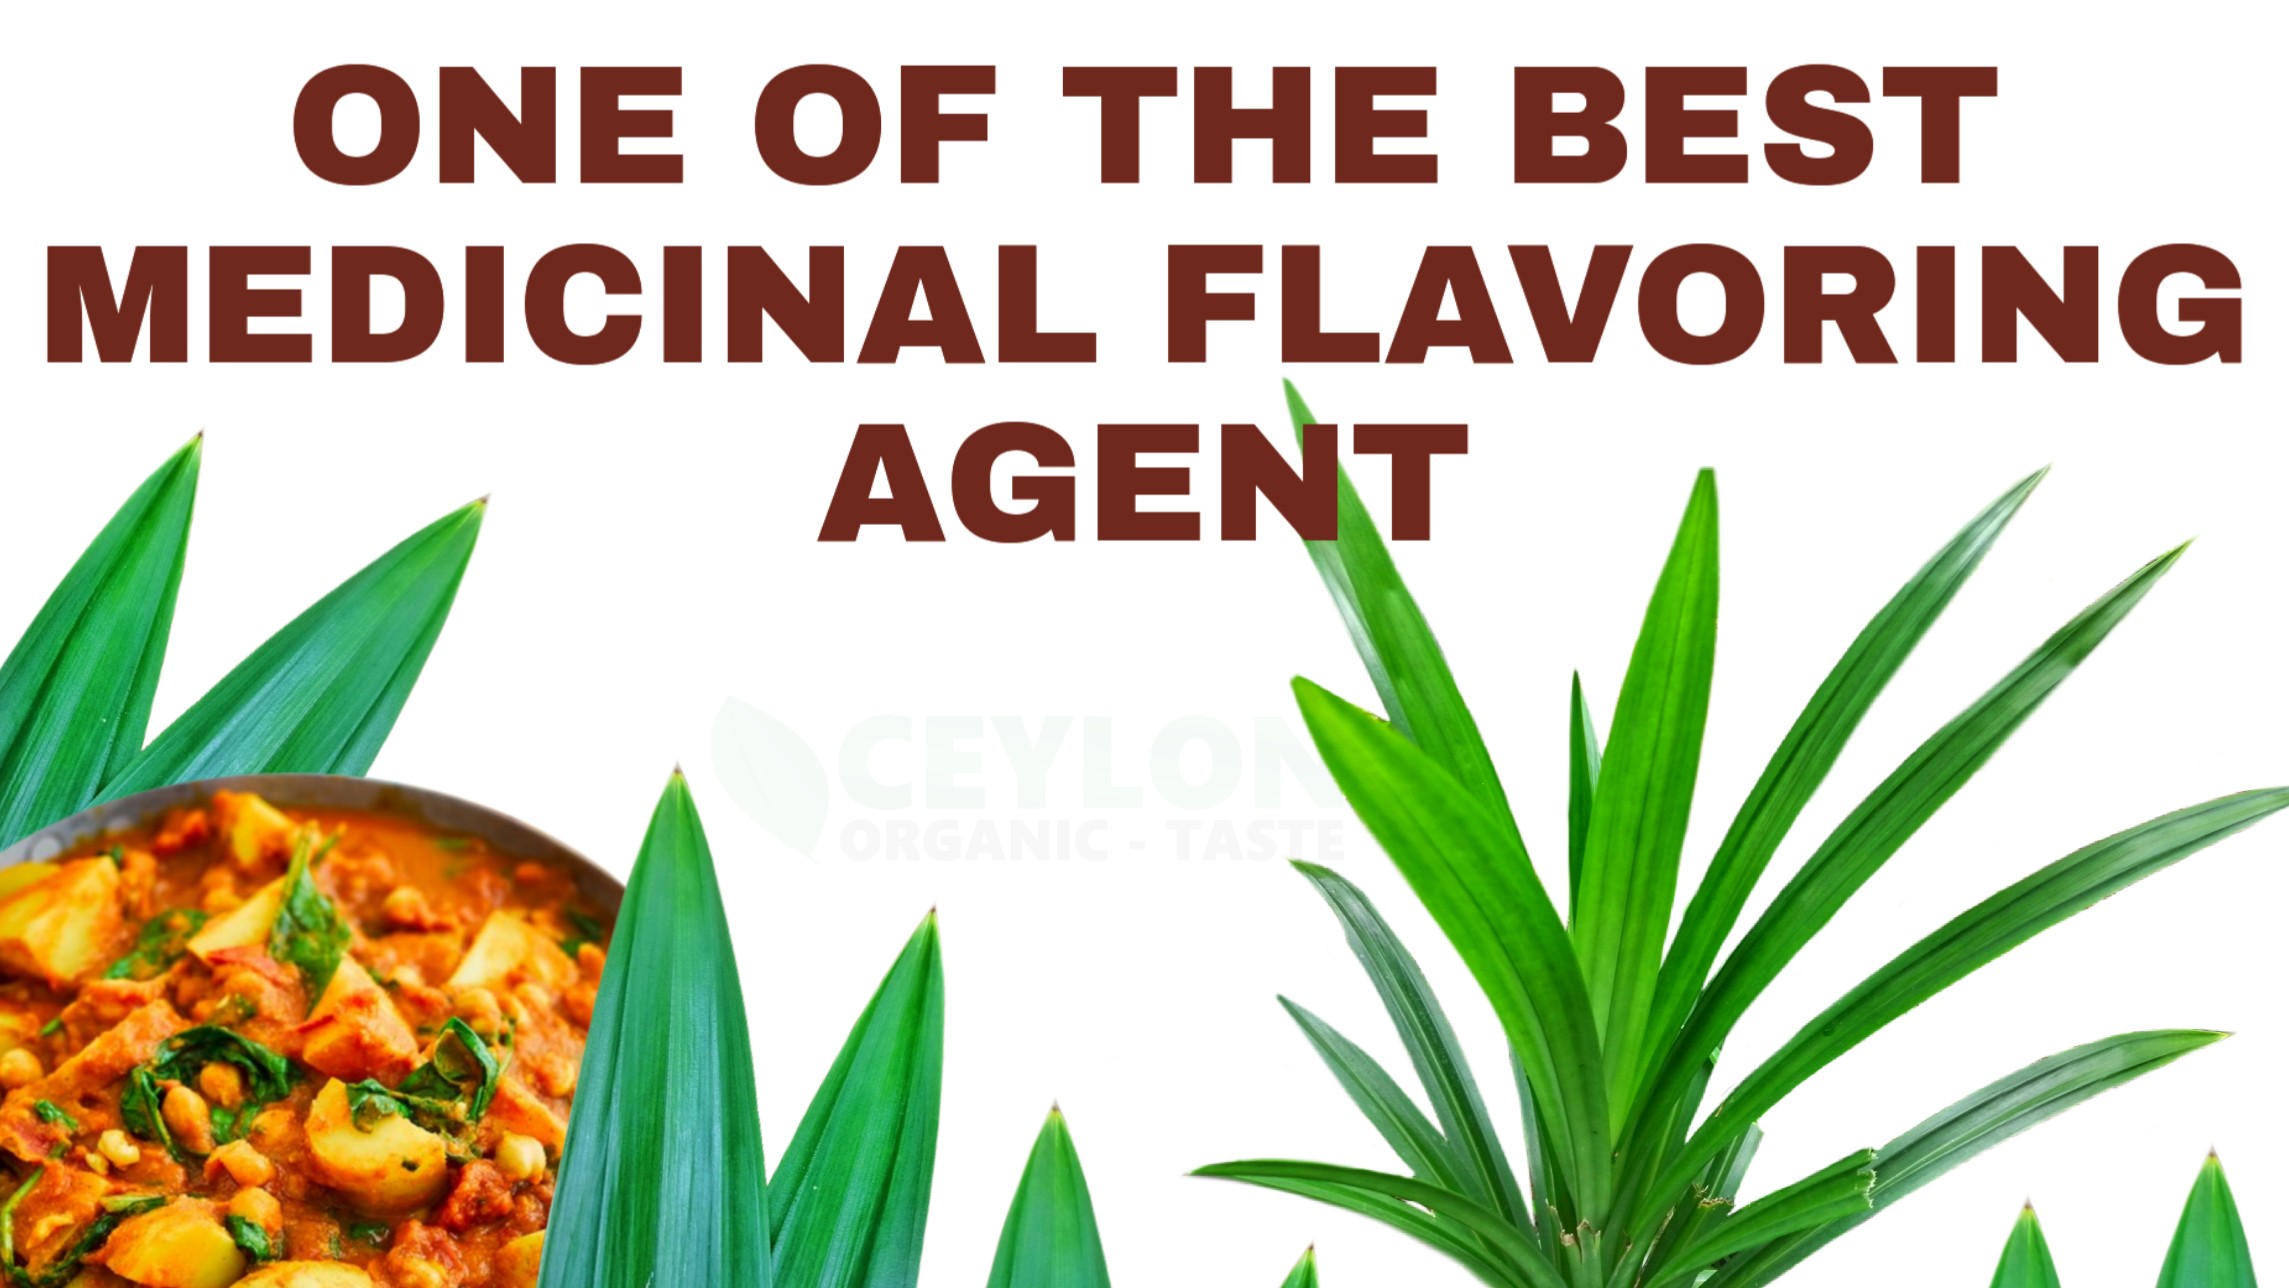 One of the best medicinal flavouring agent – Pandan